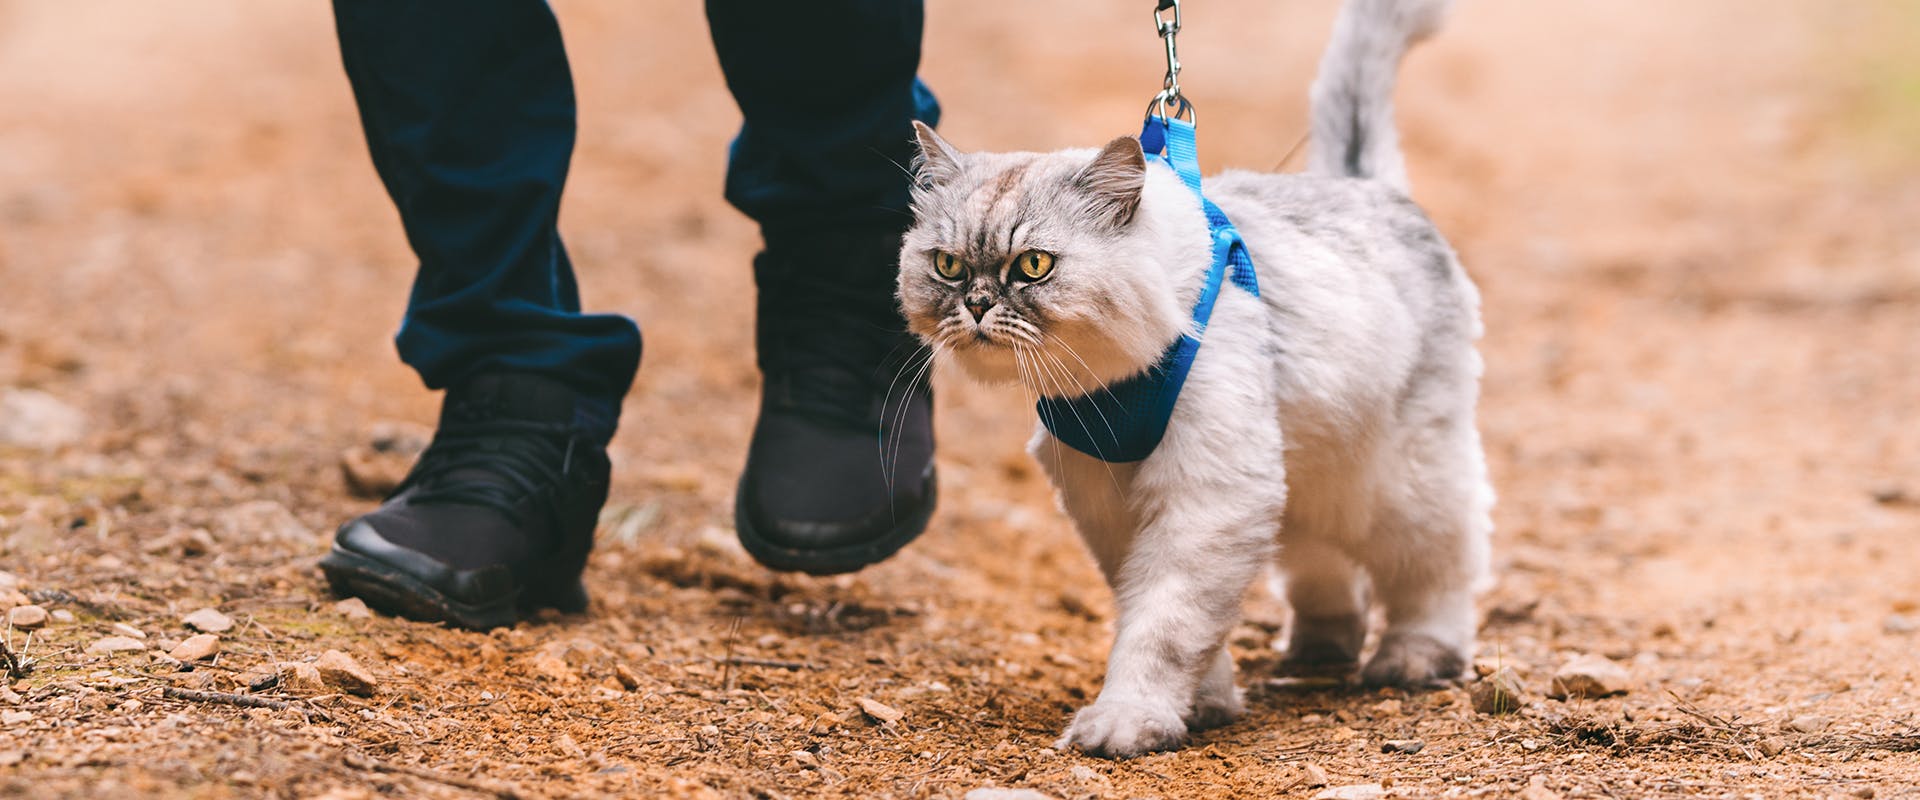 A fluffy cat wearing a bright blue cat harness being walked by a person 